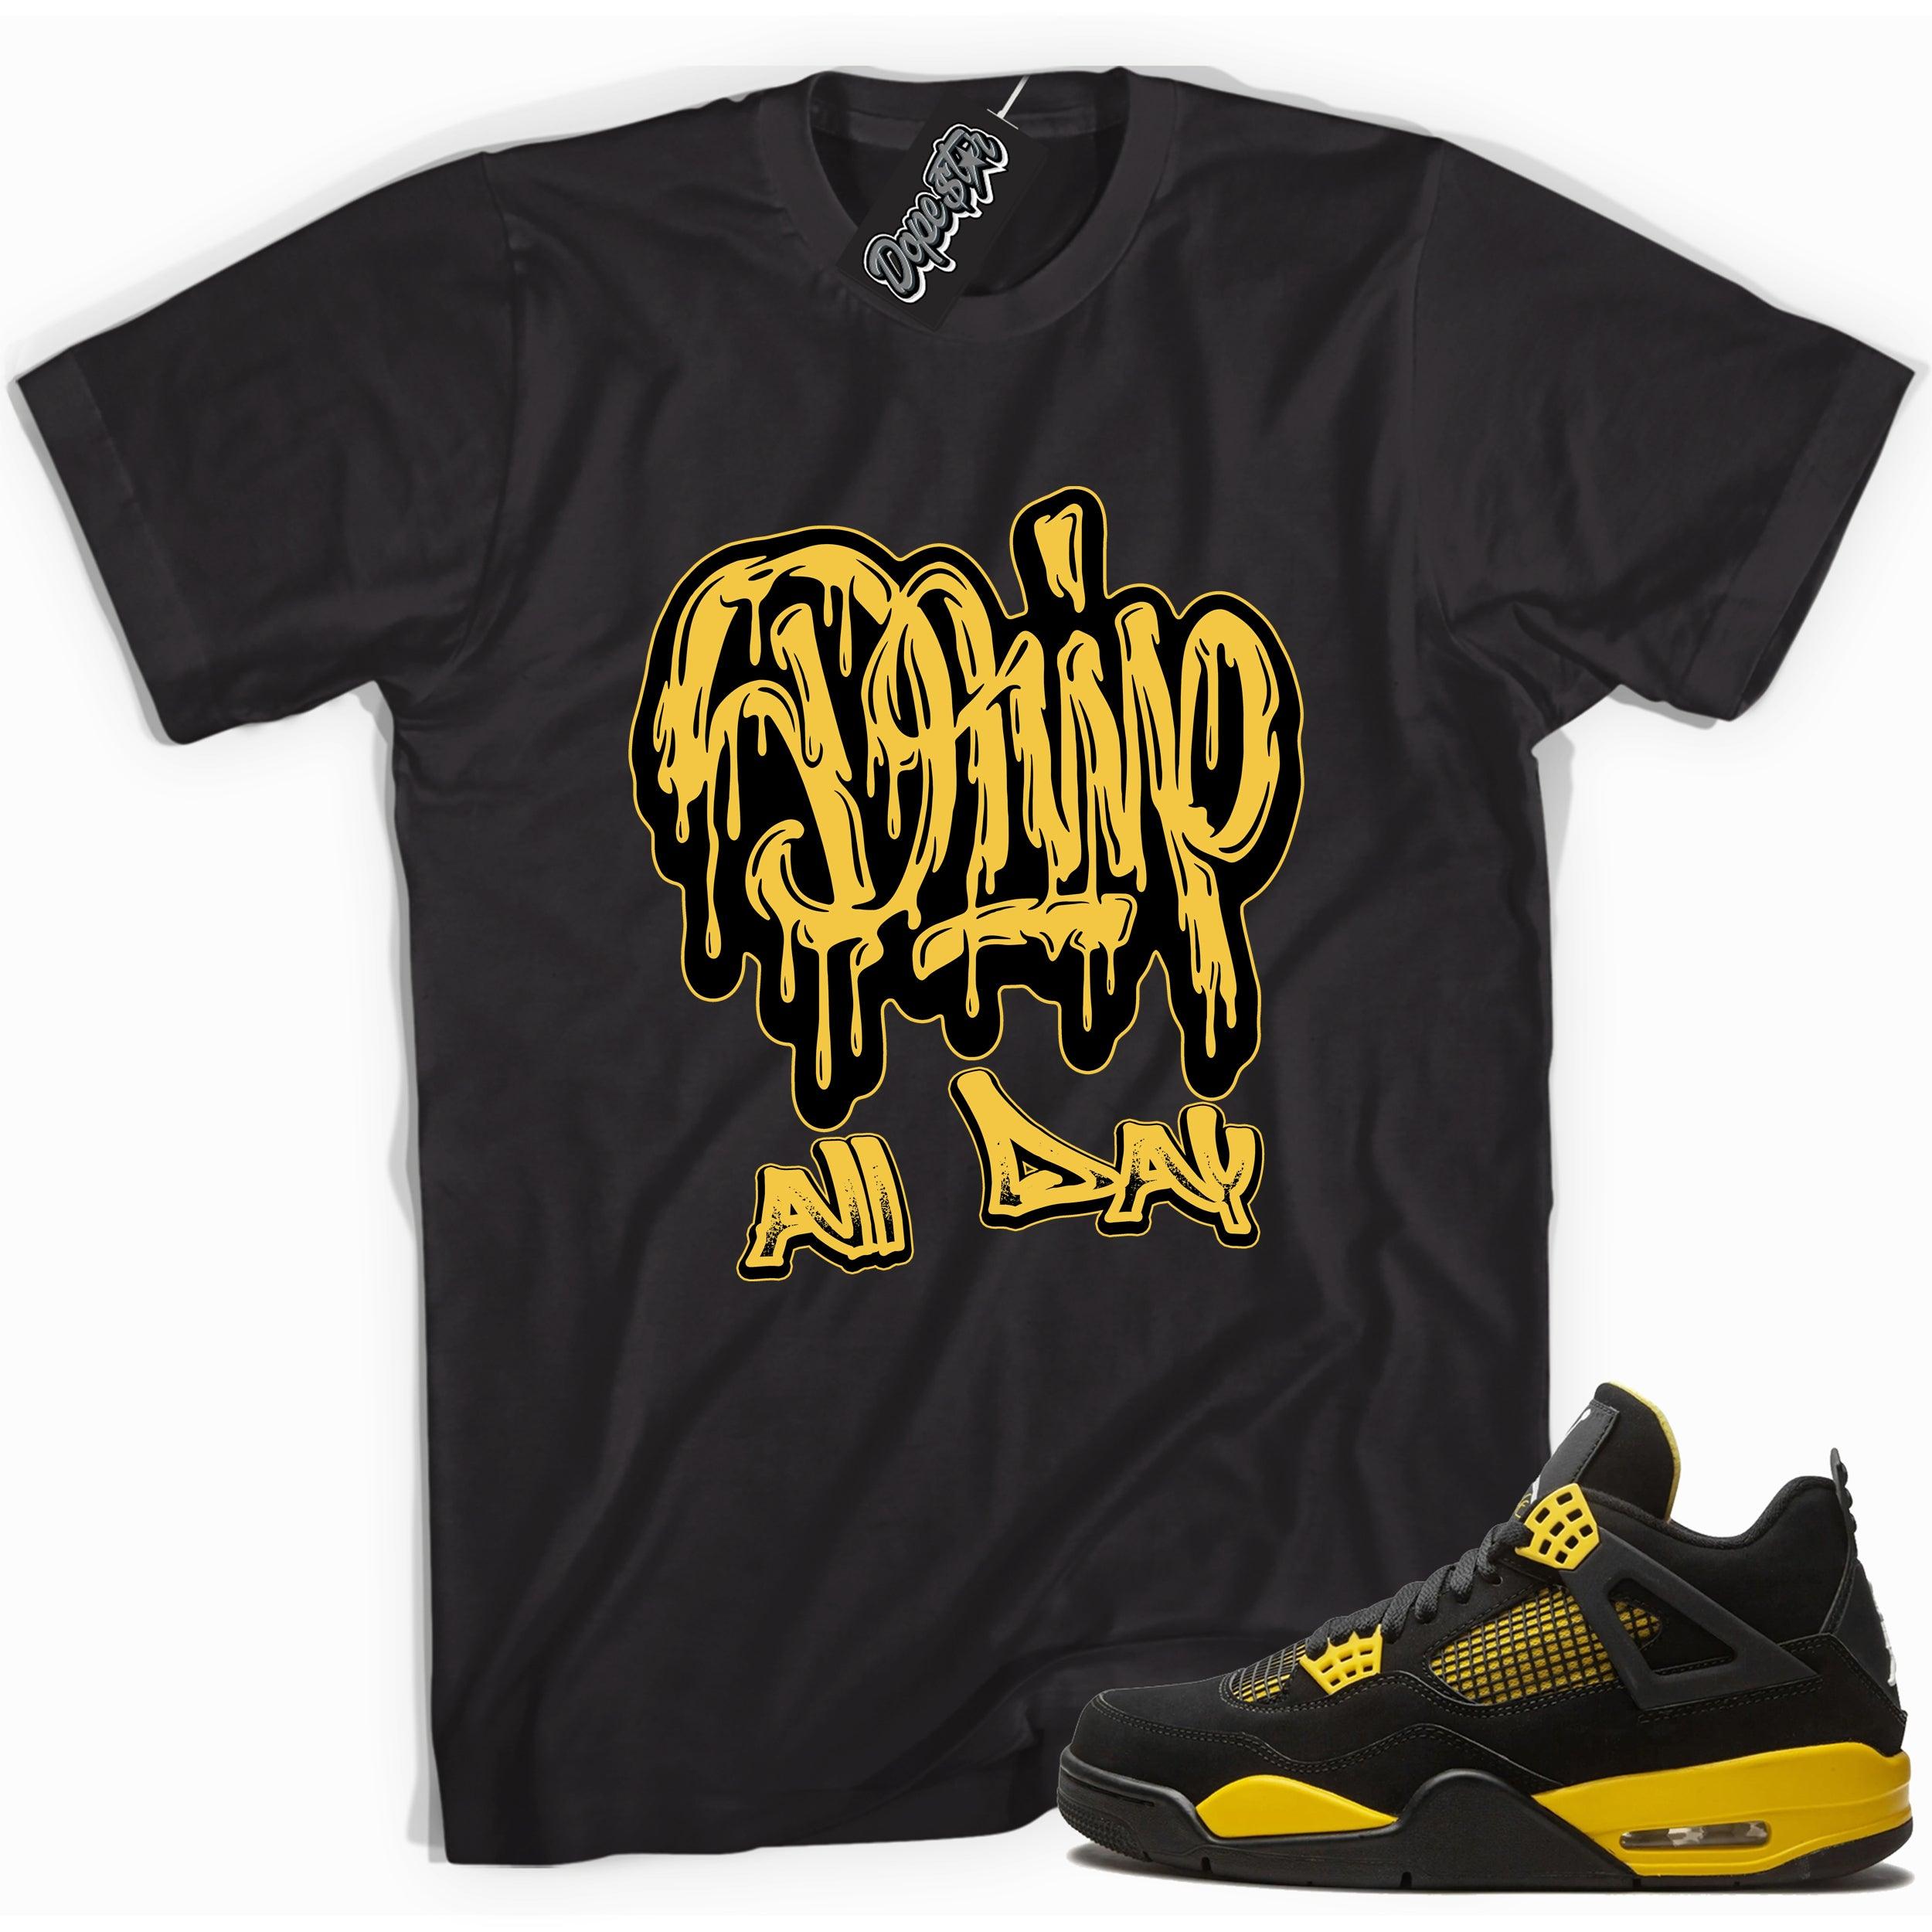 Cool black graphic tee with 'drip all day' print, that perfectly matches  Air Jordan 4 Thunder sneakers